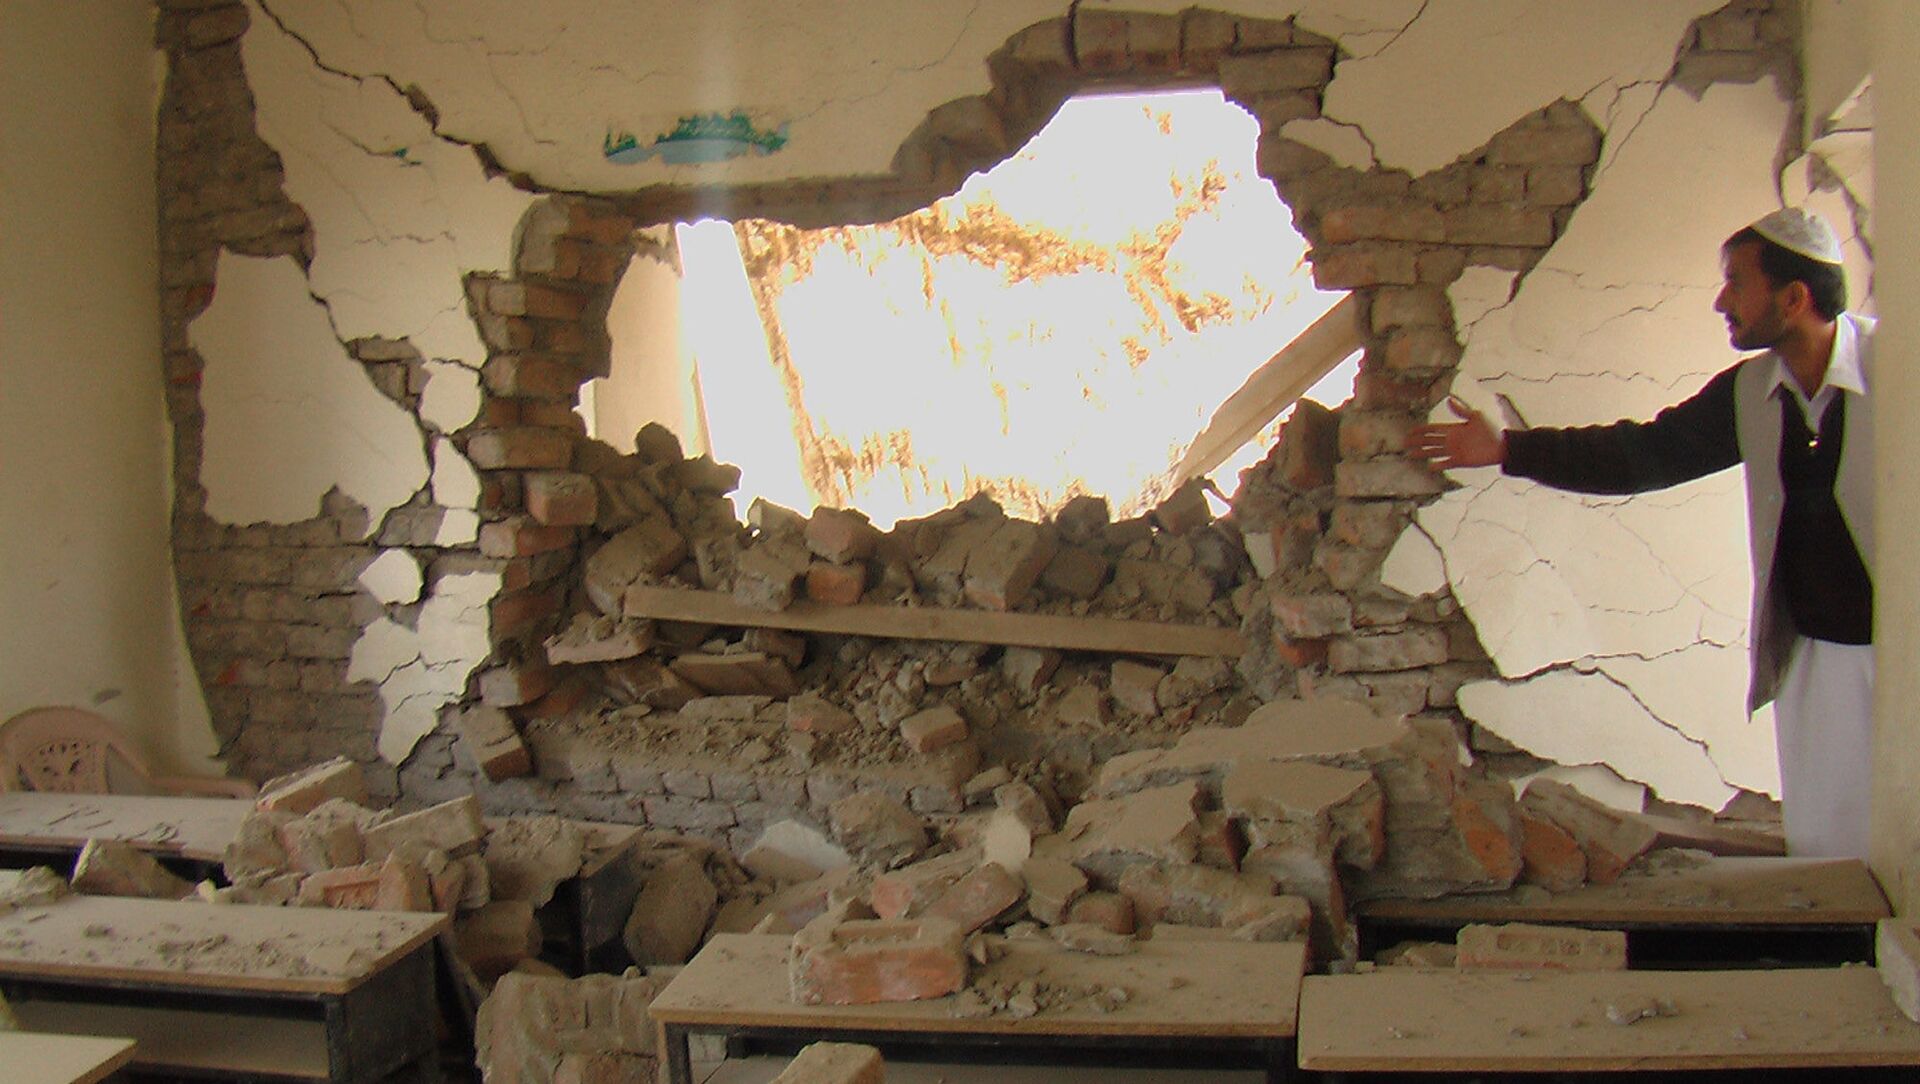 An Afghan man shows a destroyed class room after it was blown up with explosives in Mandozai, in Khost province, Afghanistan, Wednesday, Nov 19, 2008. Chief education officer of Khost province stated that the school was destroyed using explosives by the enemies of Afghanistan.(AP Photo/Nashanuddin Khan) - 俄羅斯衛星通訊社, 1920, 19.08.2021